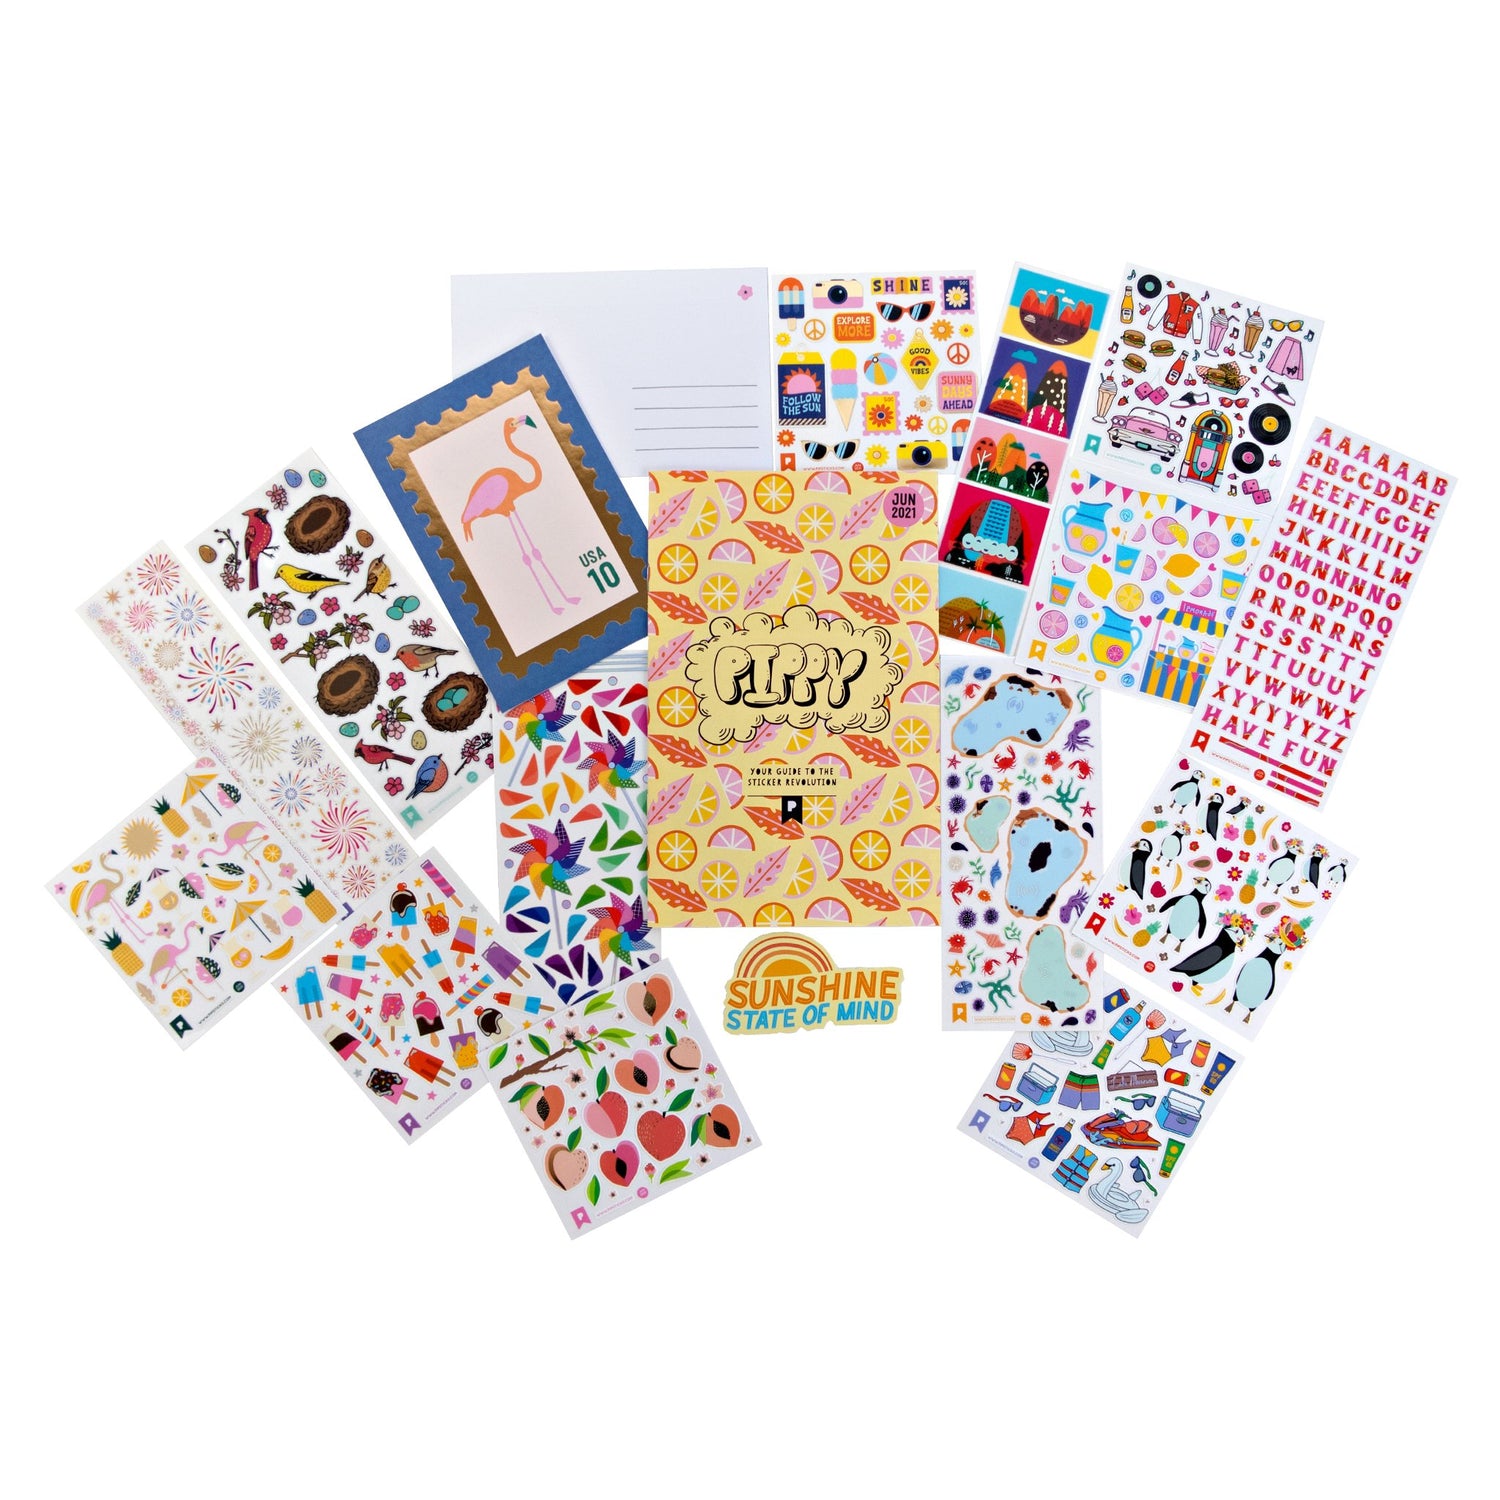 Pipsticks You Deserve All The Gold Stars Pro Monthly Sticker Subscription